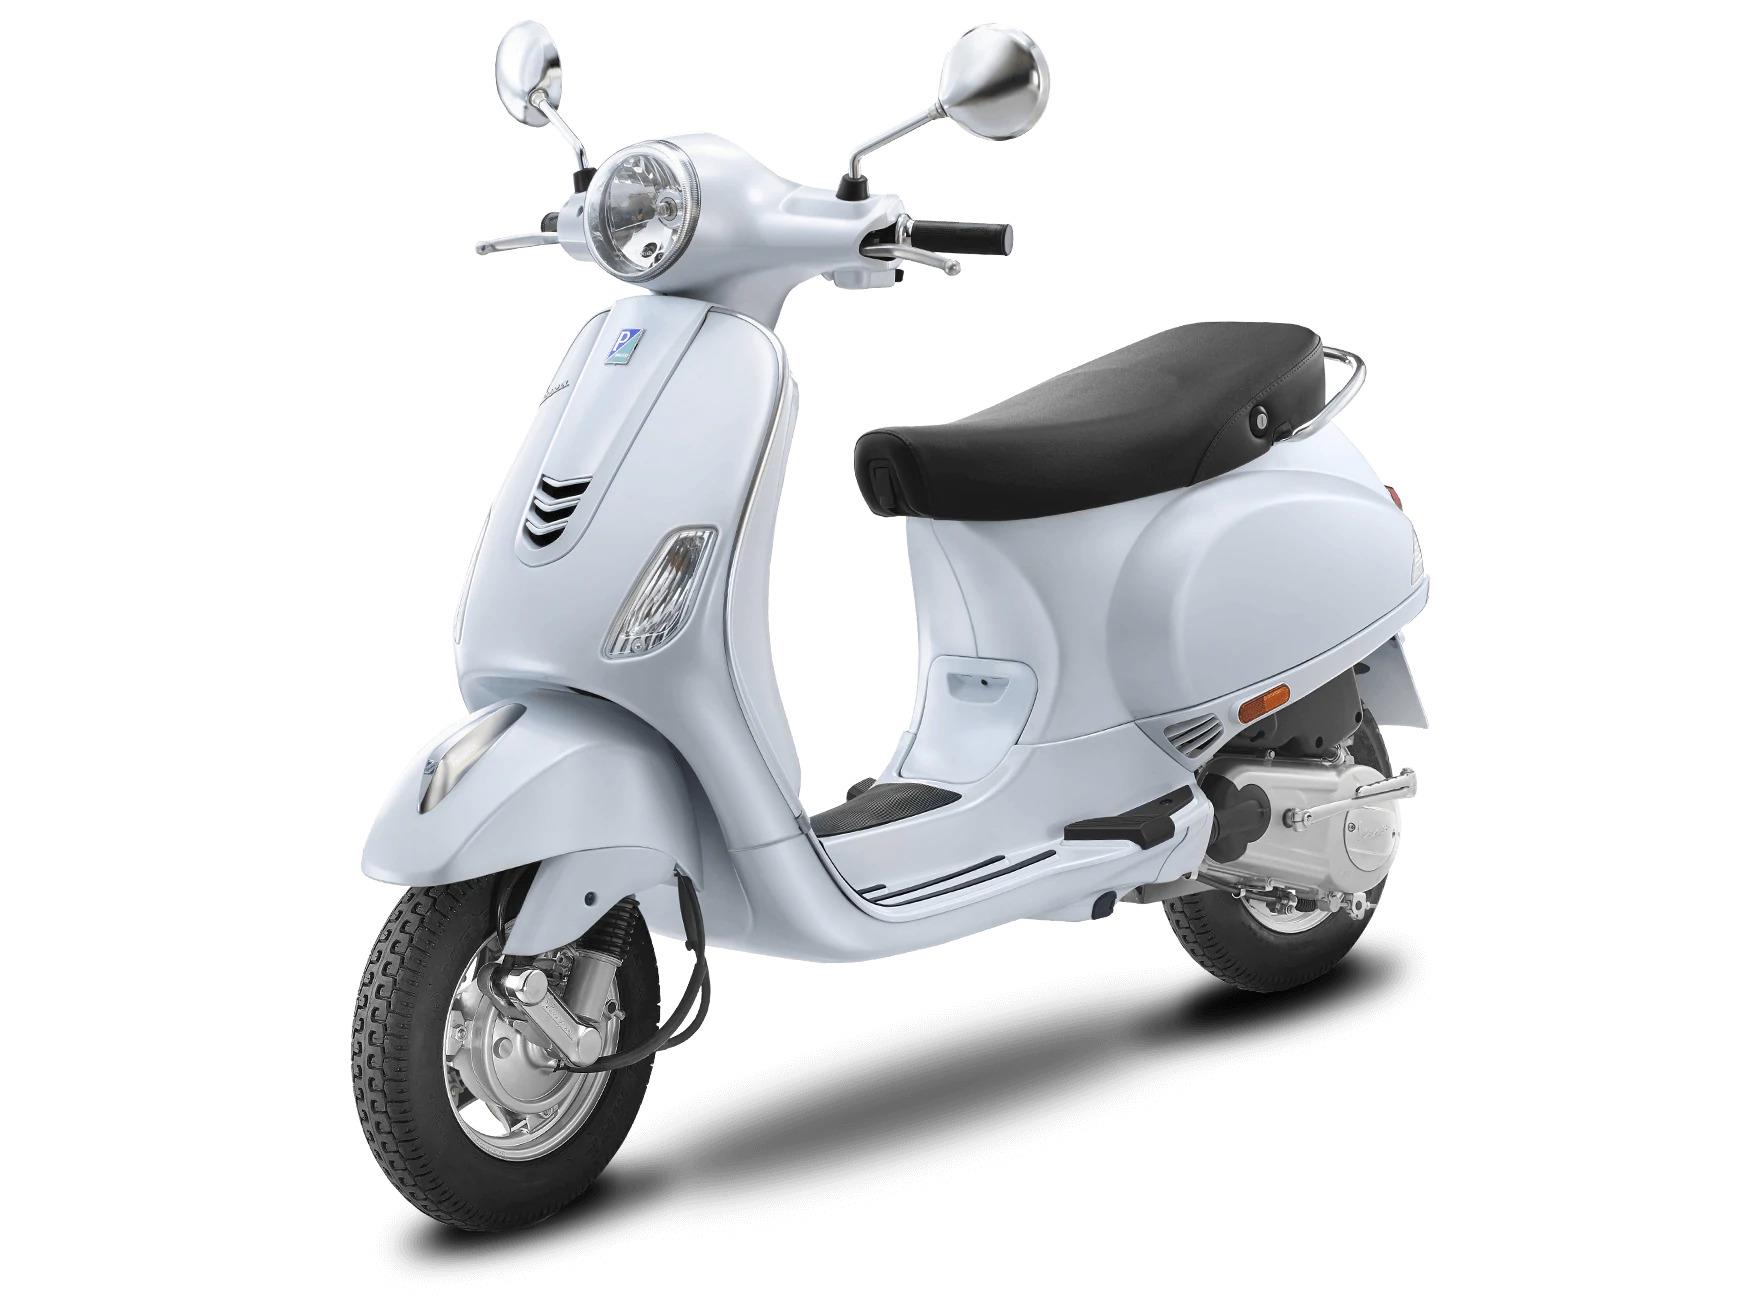 New Vespa LX 125 BS6 Price in India [Full Specifications]